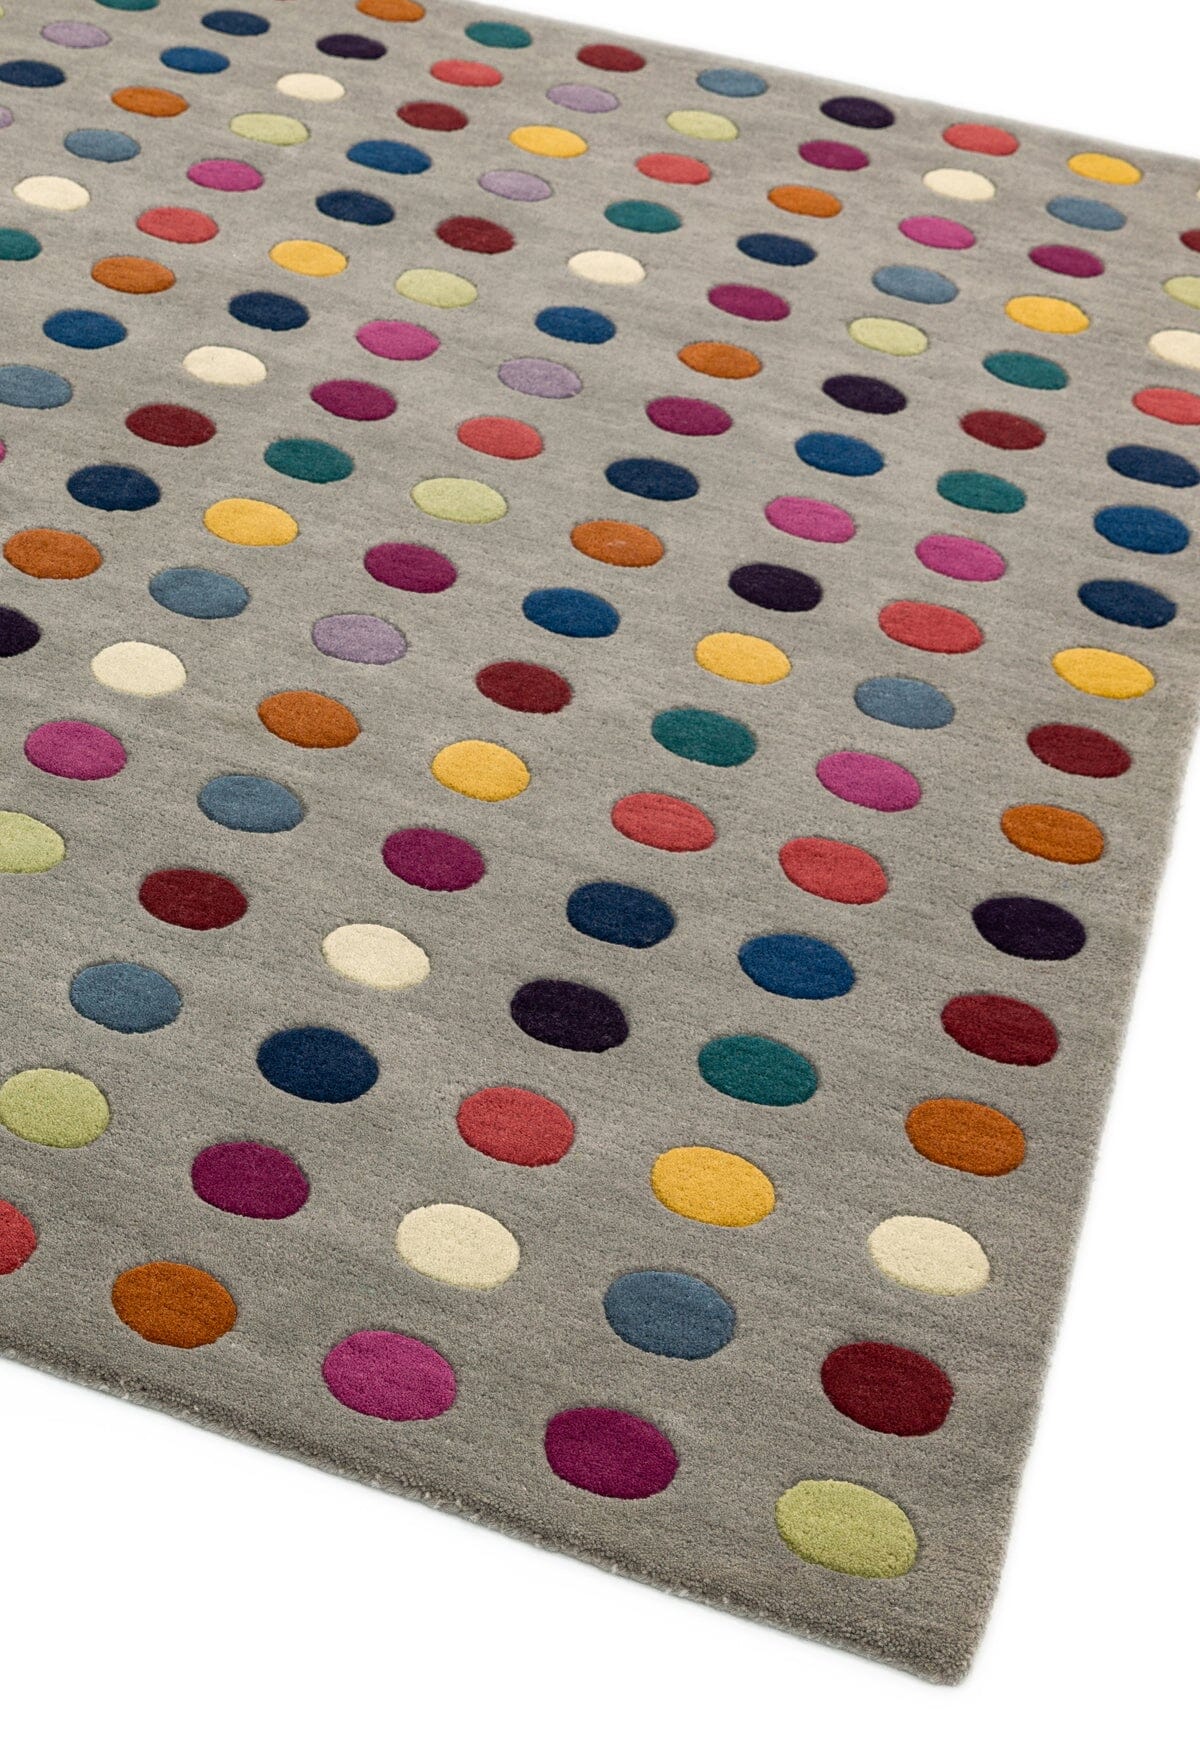 Asiatic Carpets Funk Hand Tufted Runner Spotty - 70 x 200cm